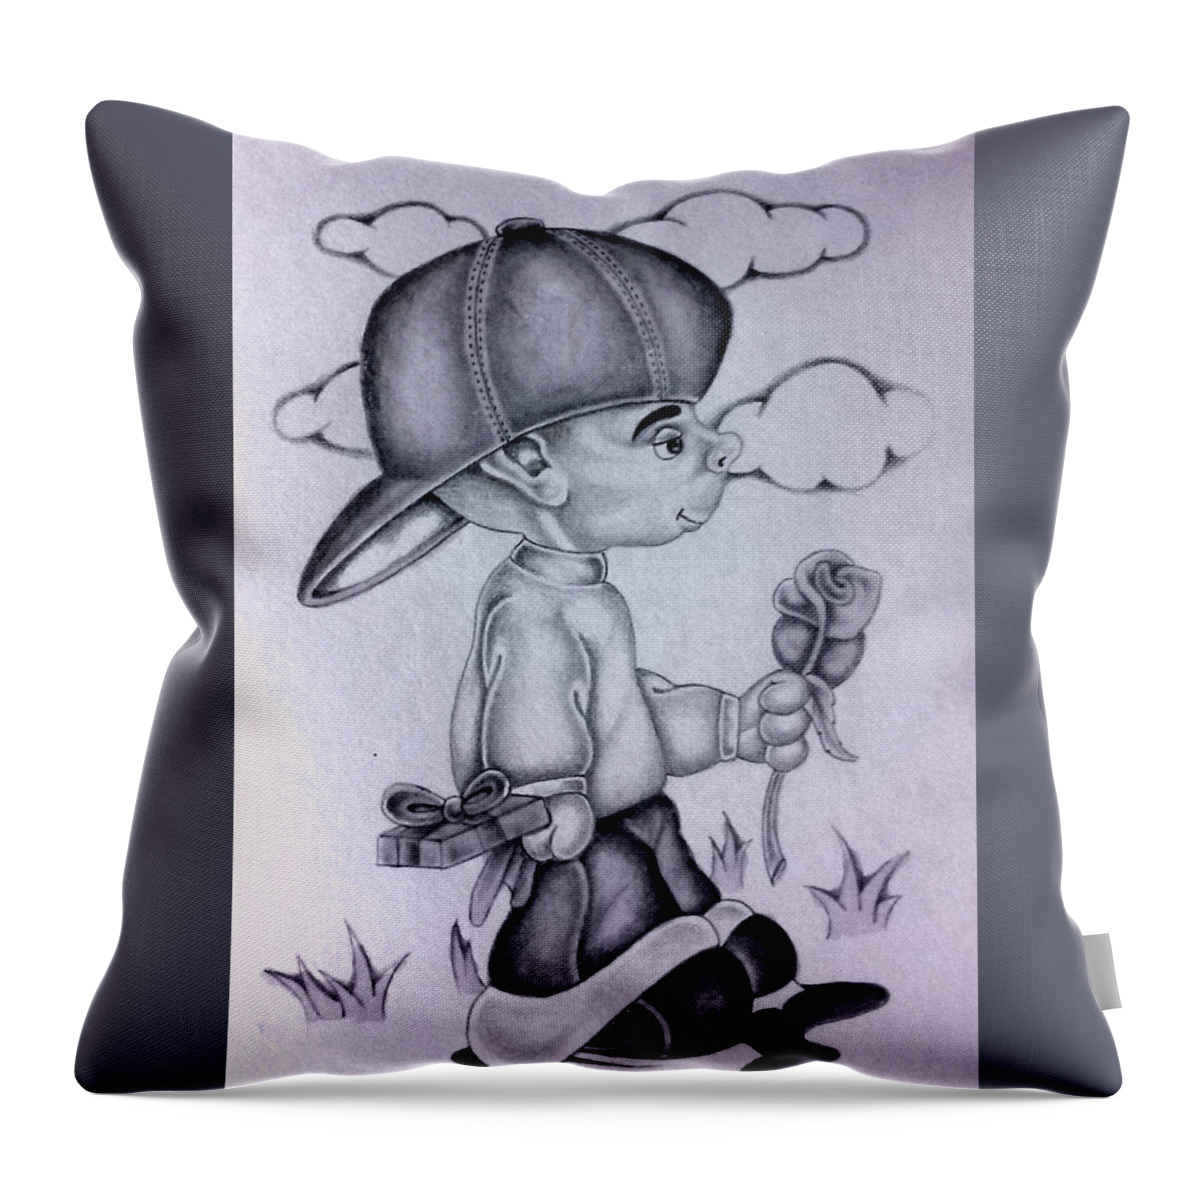 Mexican American Art Throw Pillow featuring the drawing Untitled #2 by Anthony Bullet Rivas